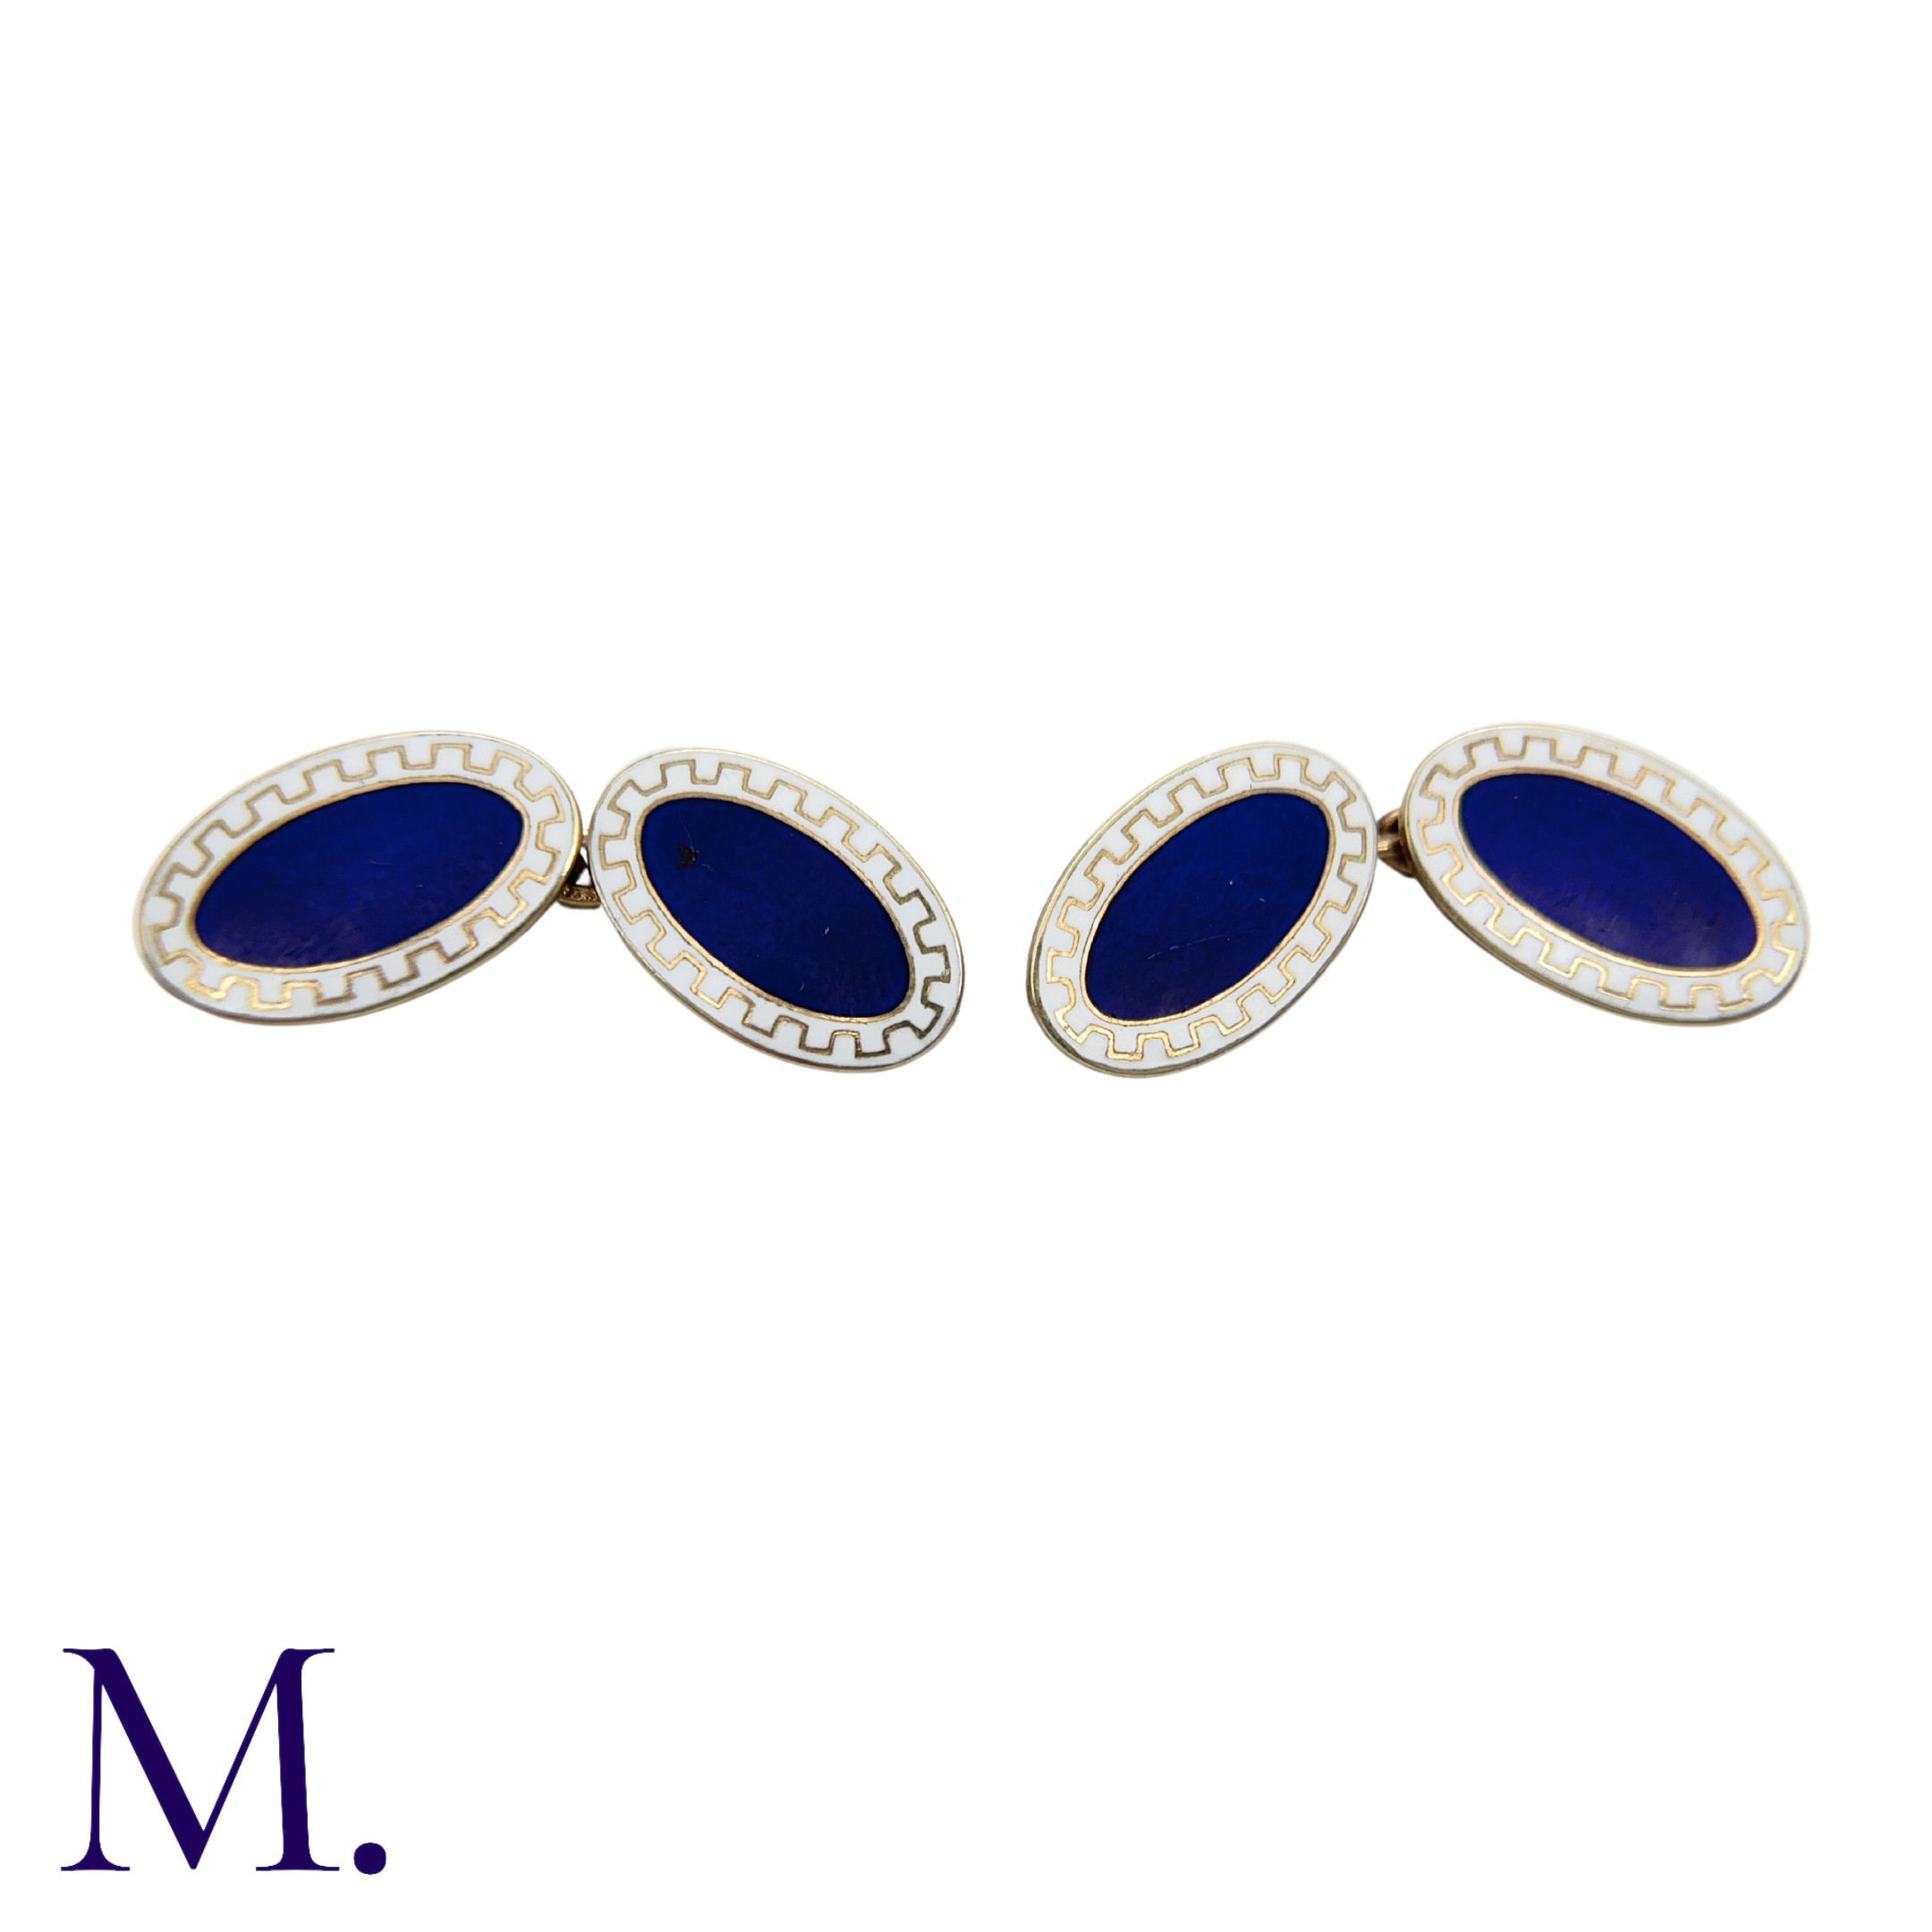 A Pair Of Enamelled cufflinks in 9k yellow gold, decorated with white and blue enamel. Hallmarked